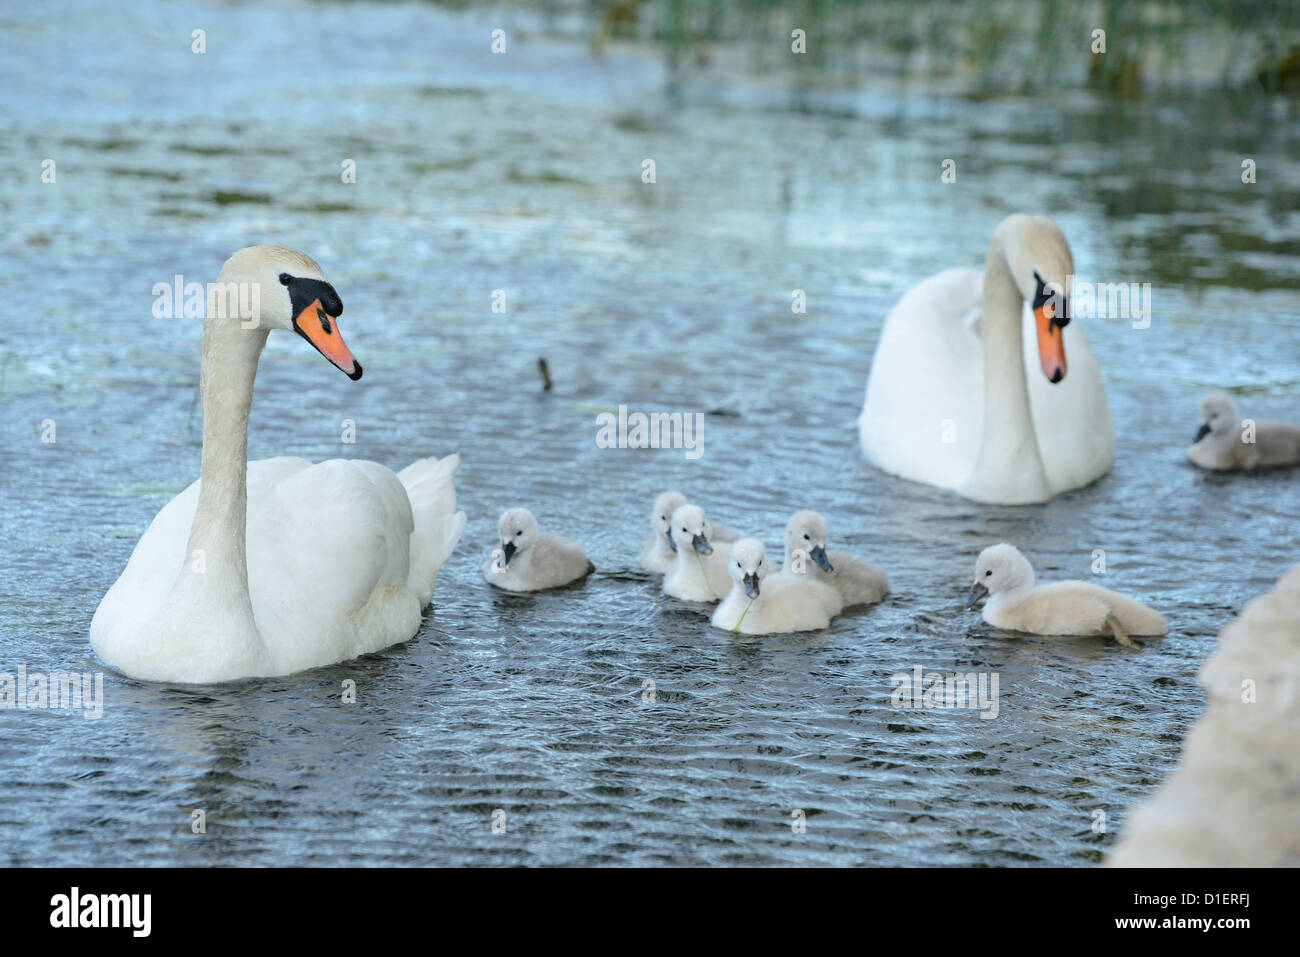 Group of Mute Swans (Cygnus olor) floating on water Stock Photo